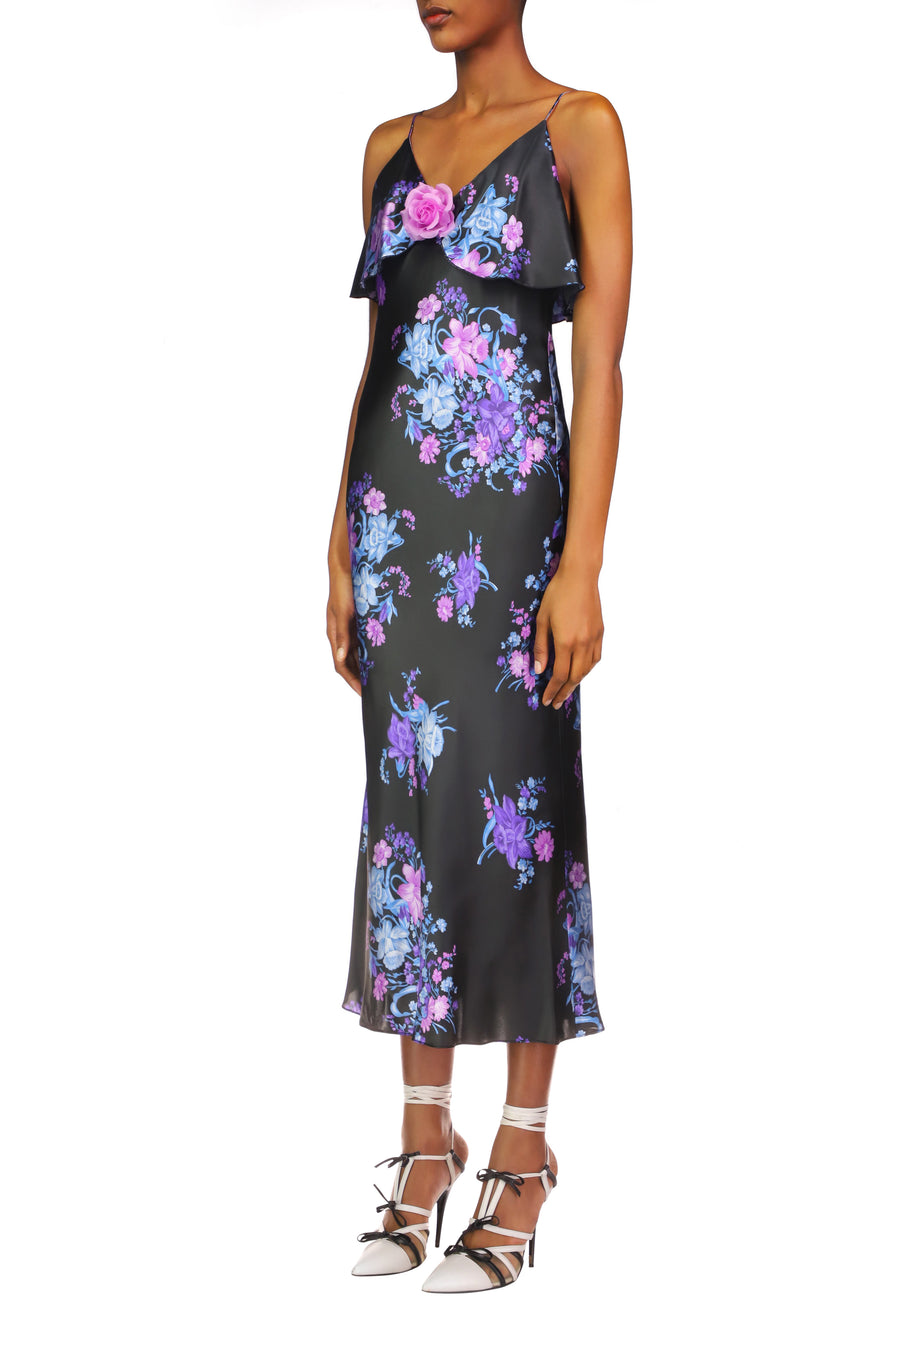 Floral Printed Satin Charmeuse Bias Slip Dress With Ruffle And Silk Flower Detail